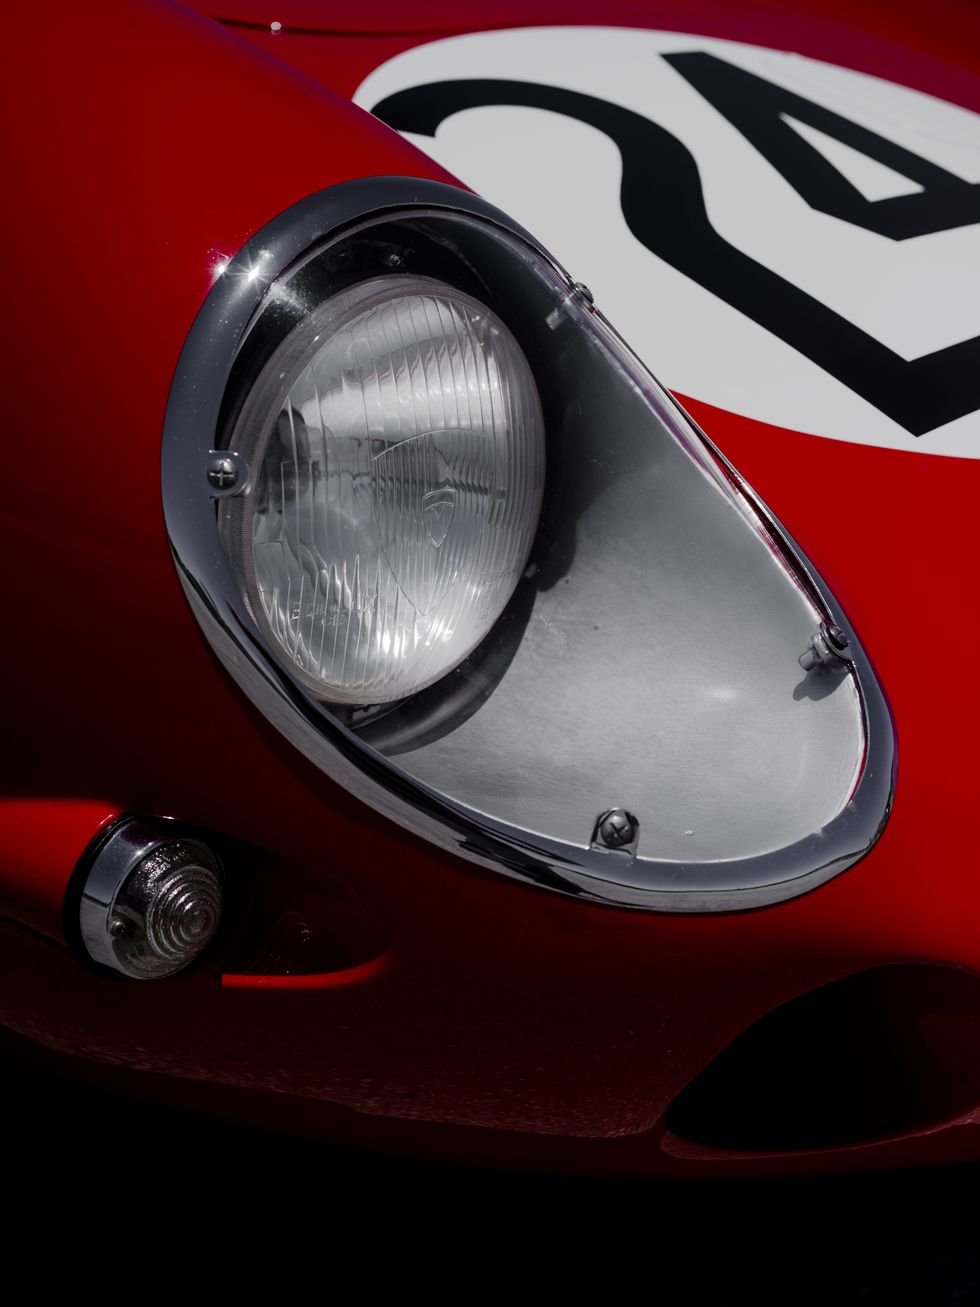 How the Ferrari 250 GTO Became the Most Valuable Car of All Time